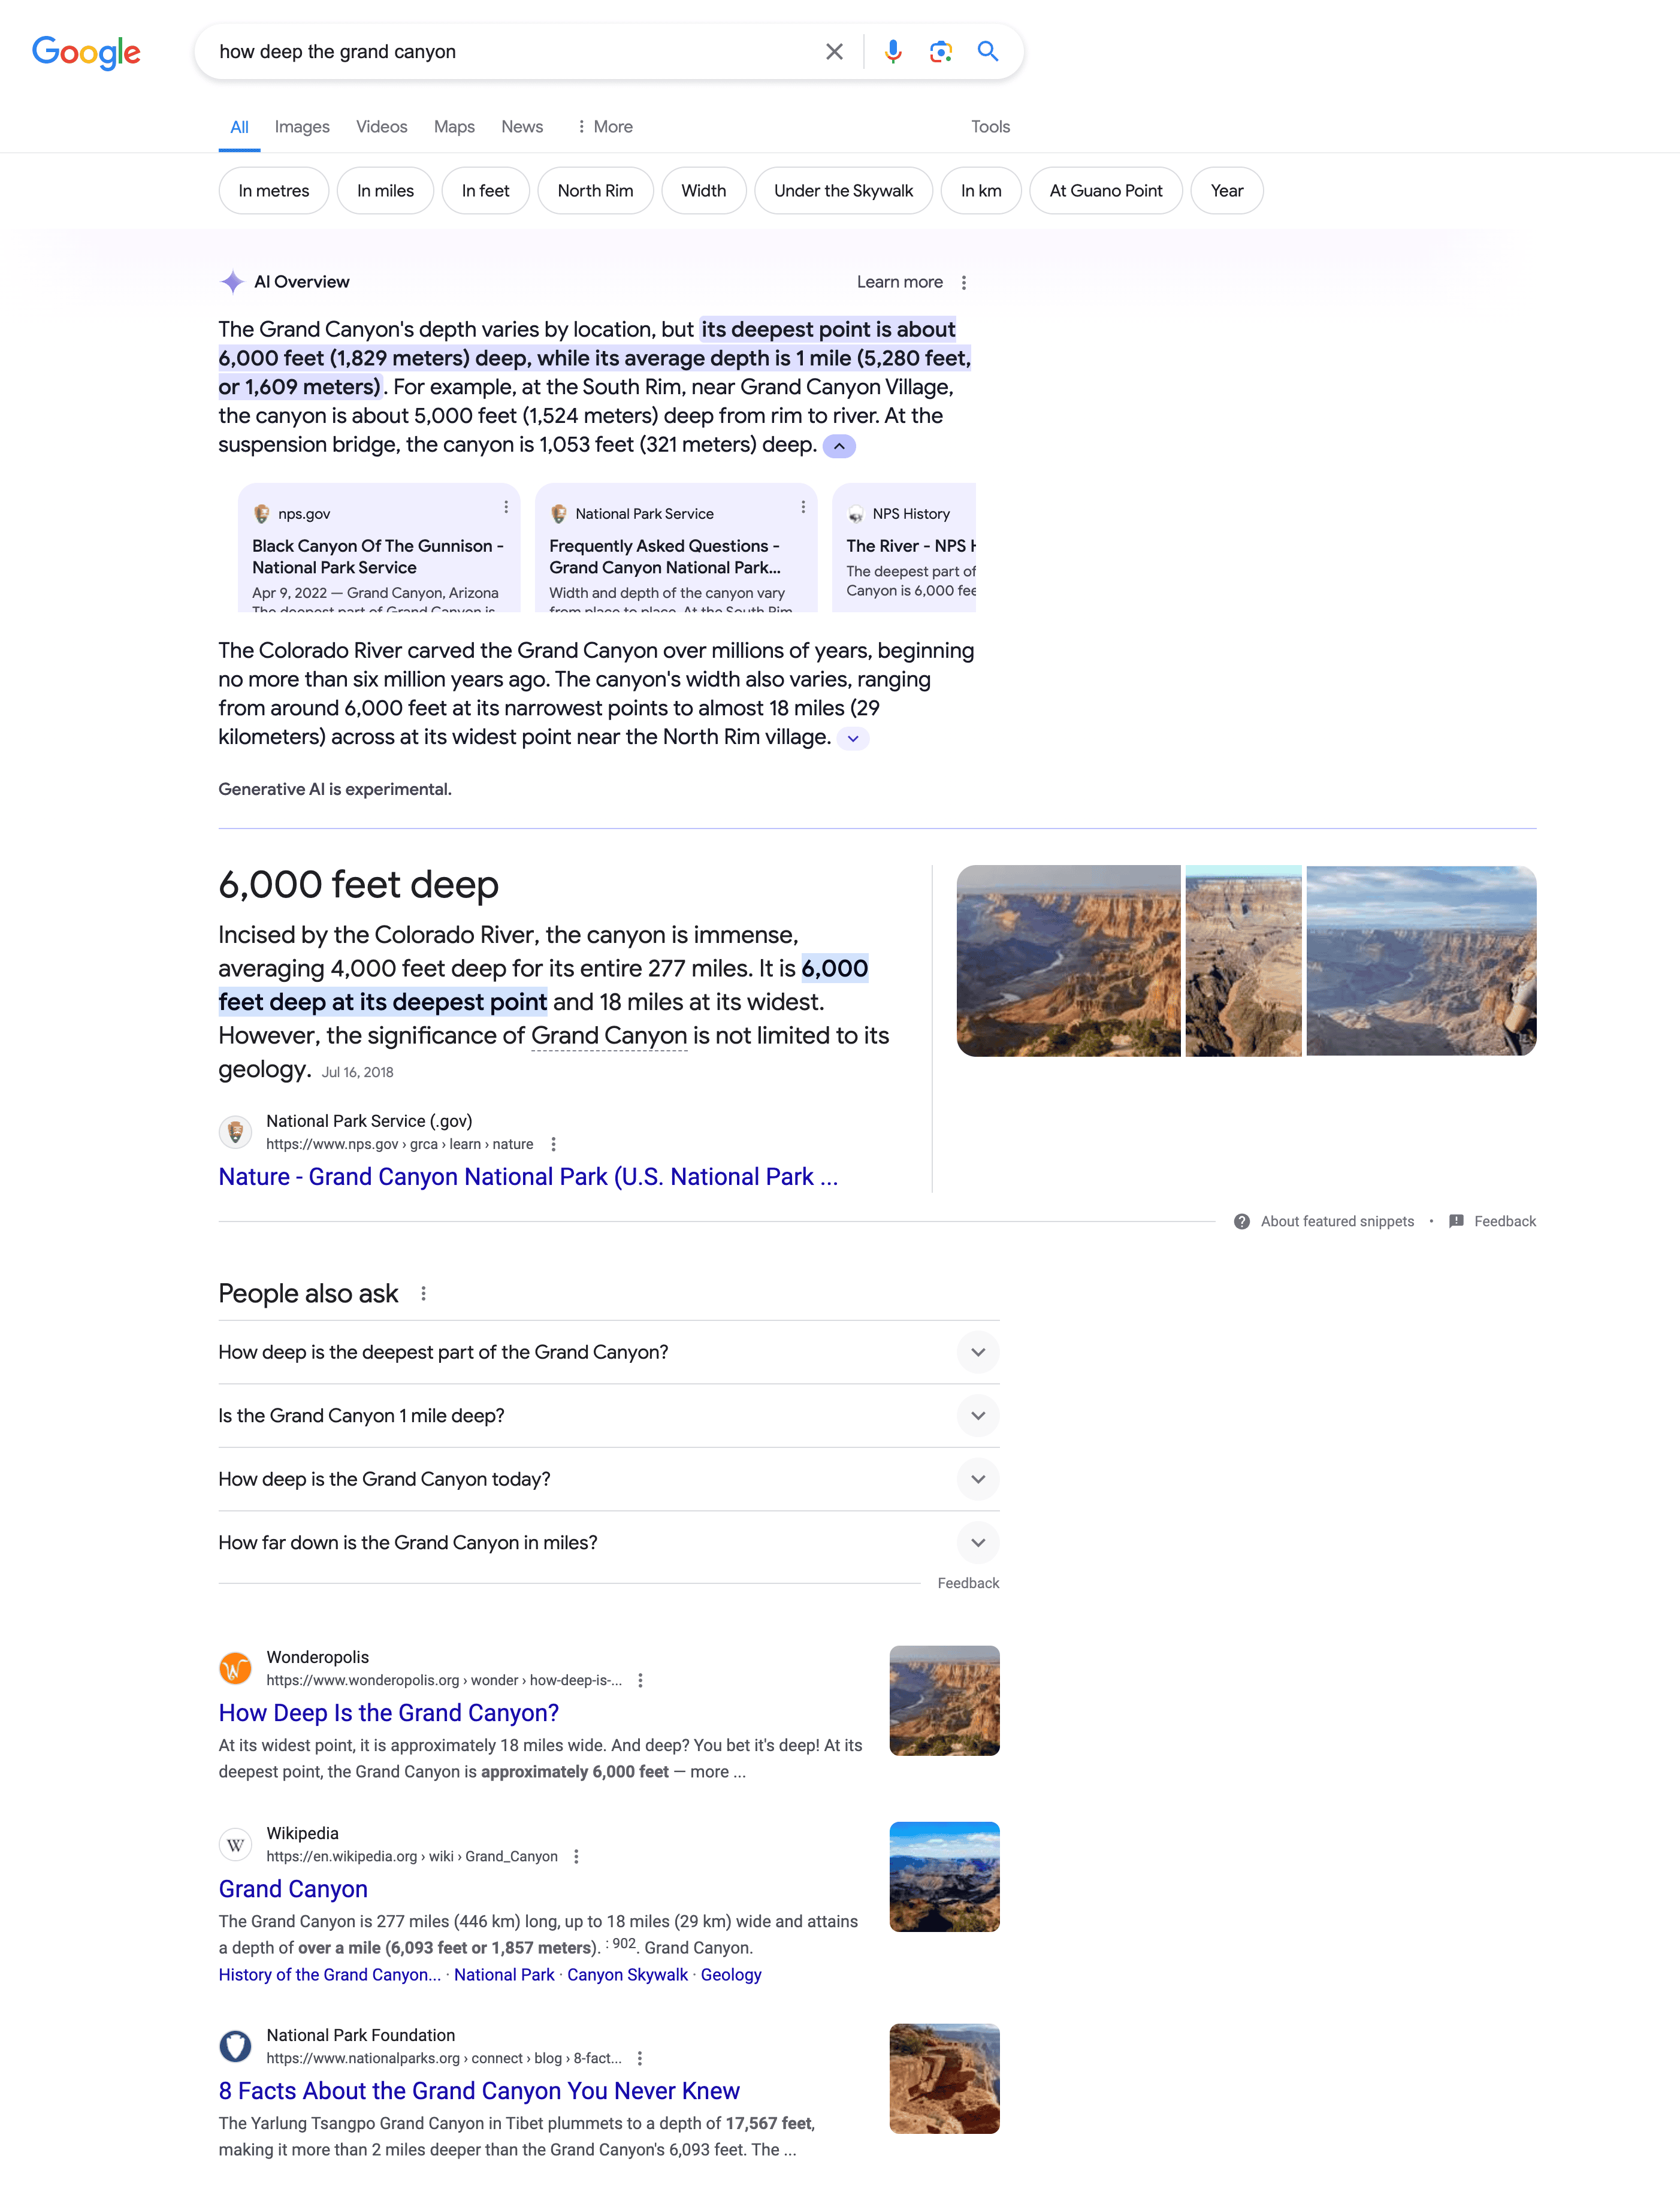 A screenshot of the search results page with the organic results pushed way down the page